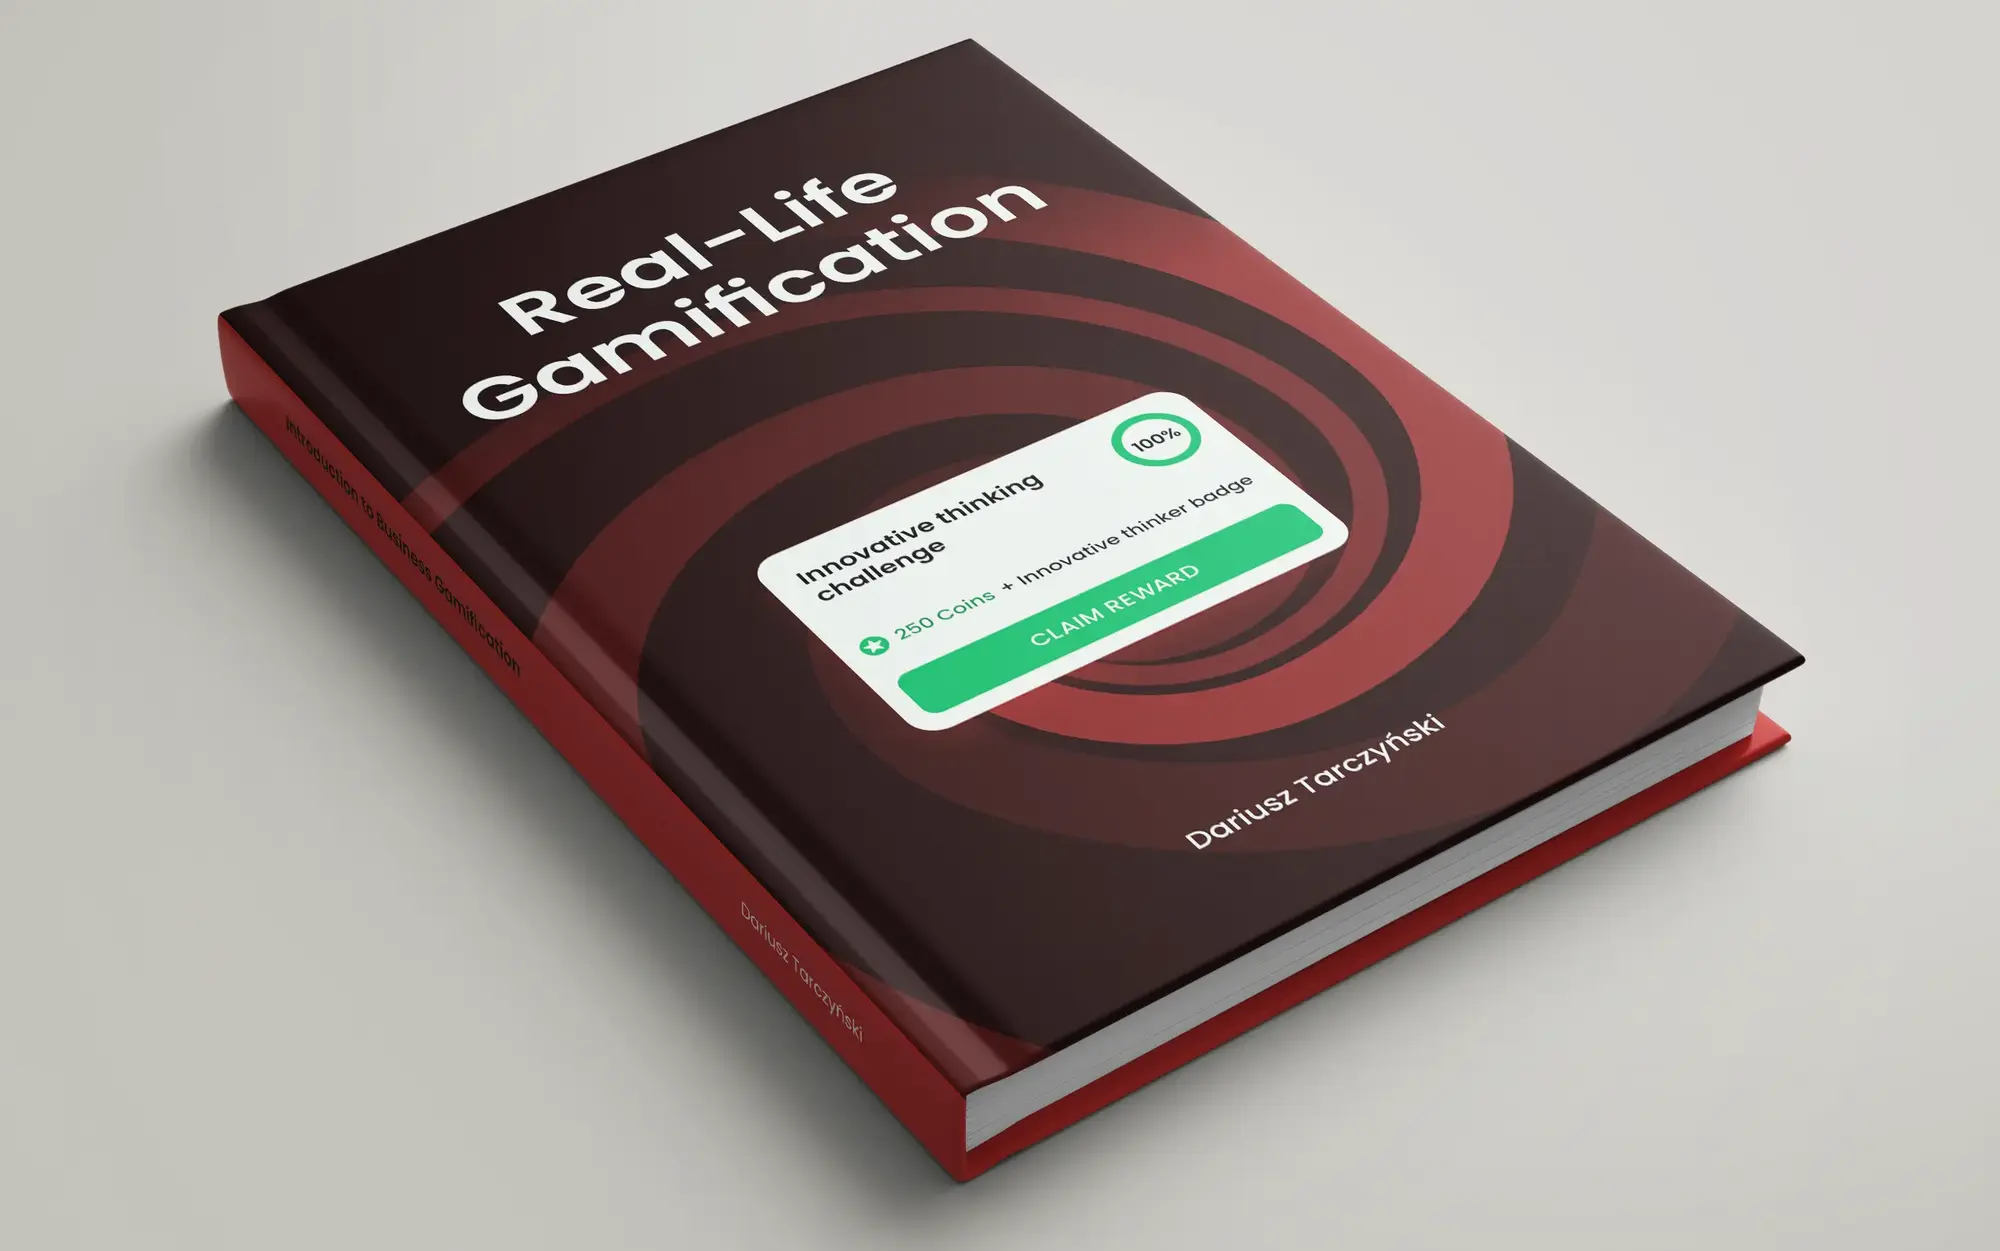 gamification book